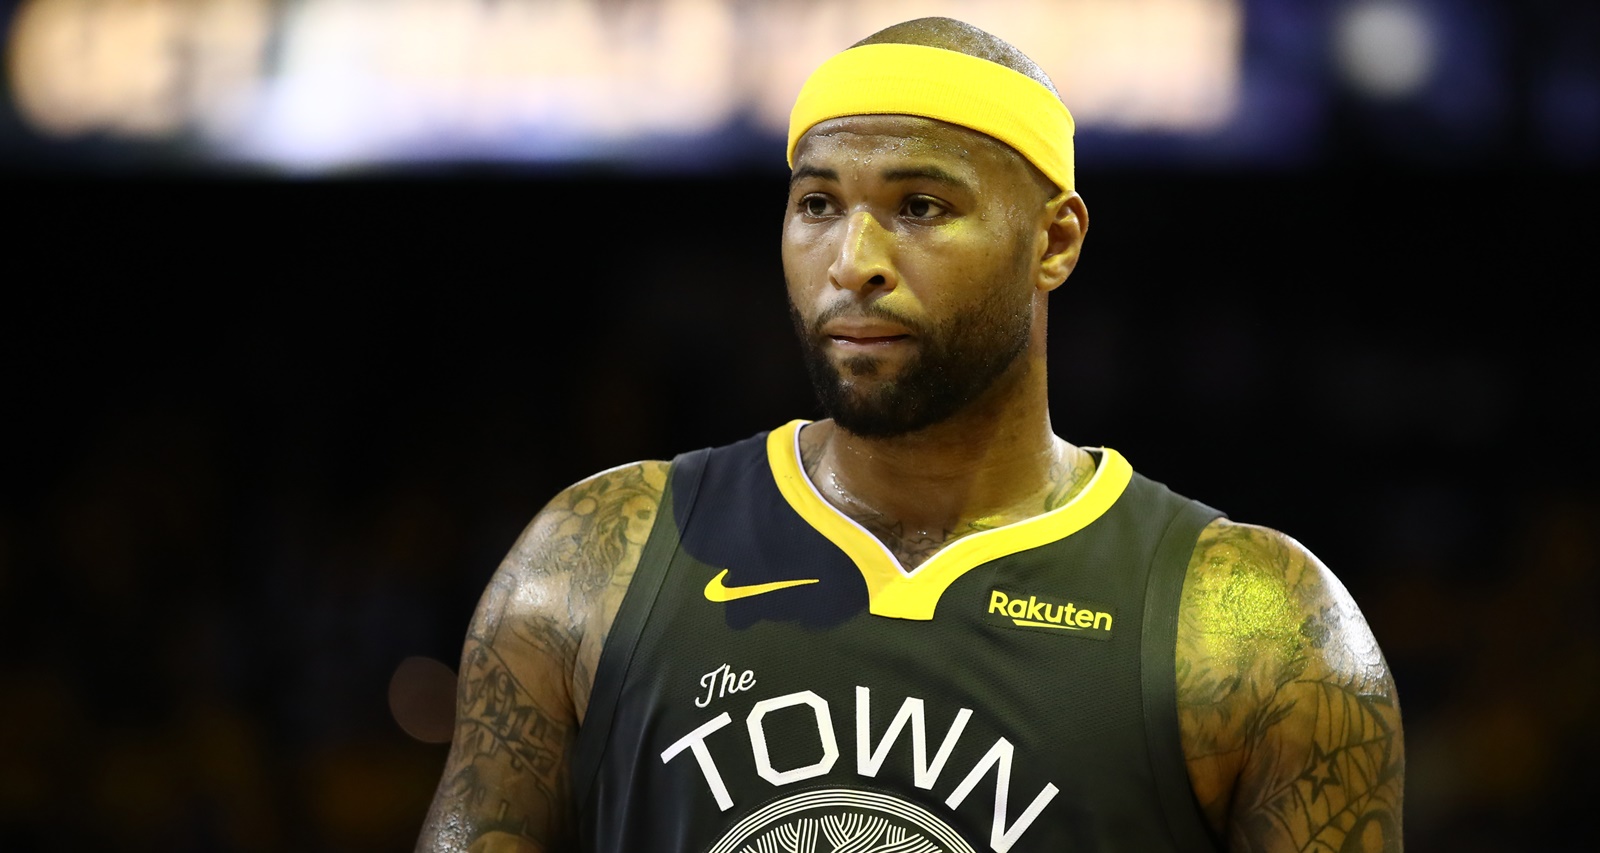 Morgan Lang Wiki: Facts about DeMarcus Cousins’ Longtime Girlfriend-Turned-Newlywed Wife